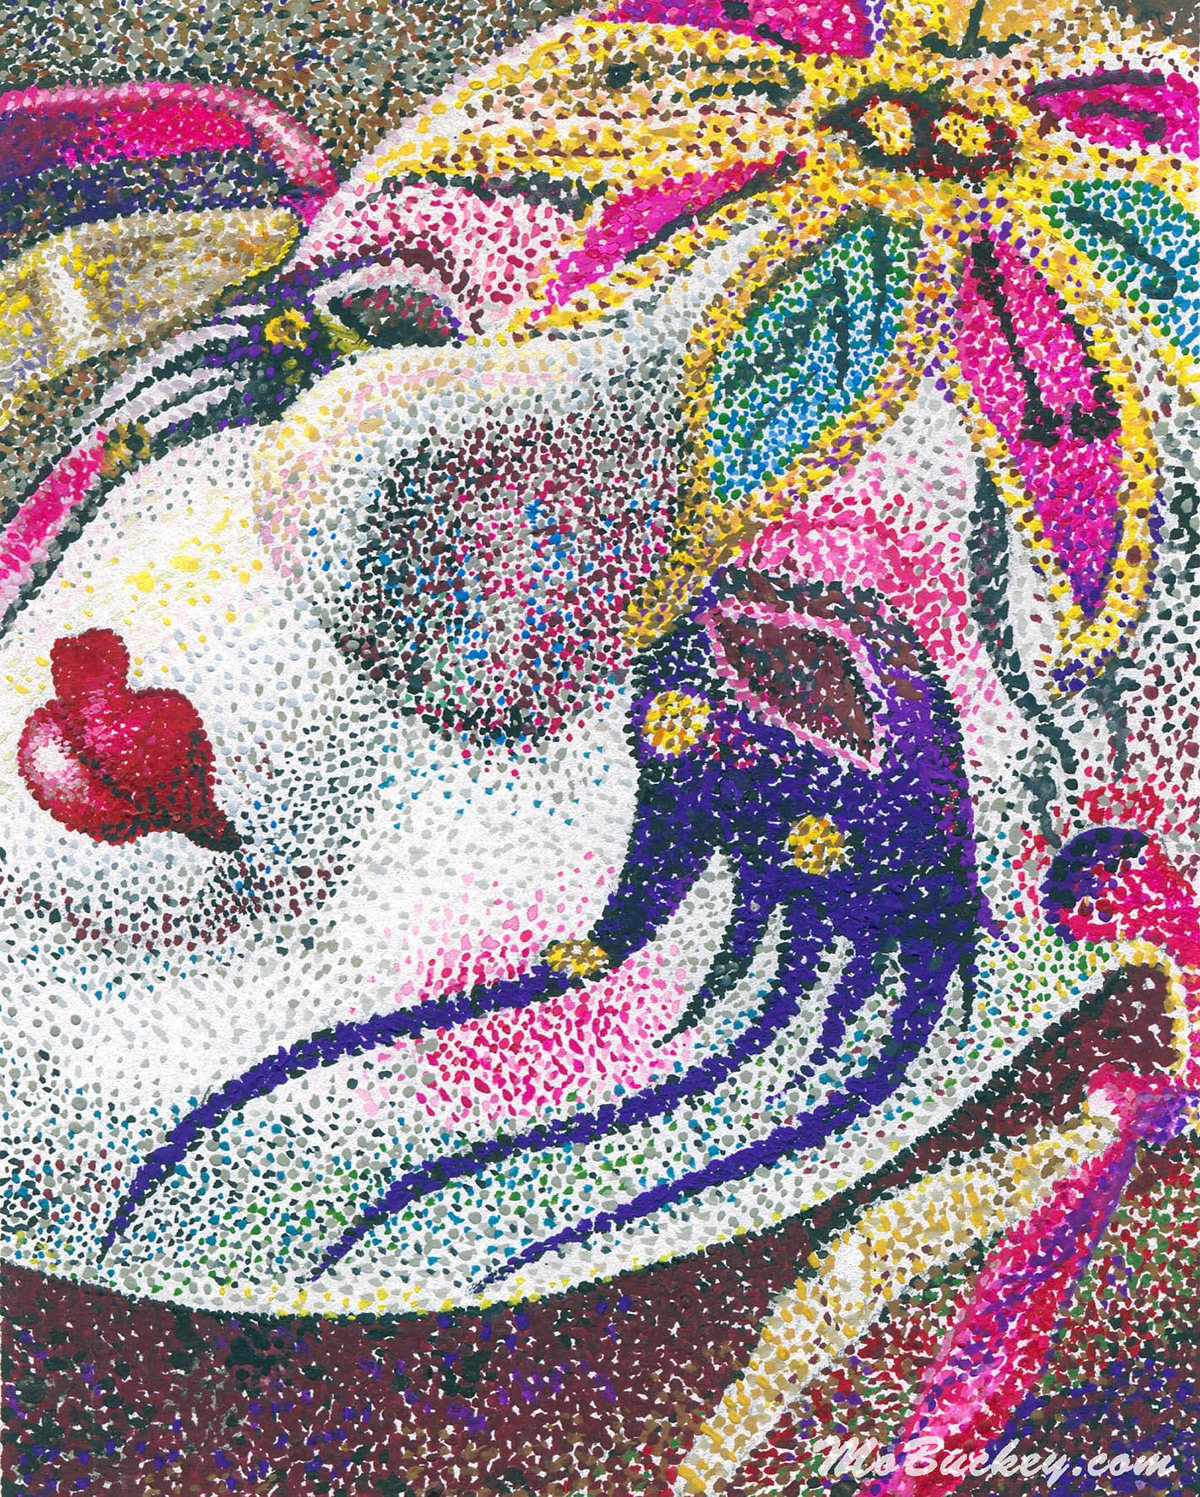 a pointillism divisionism style inspired mardi gras mask gouache painting